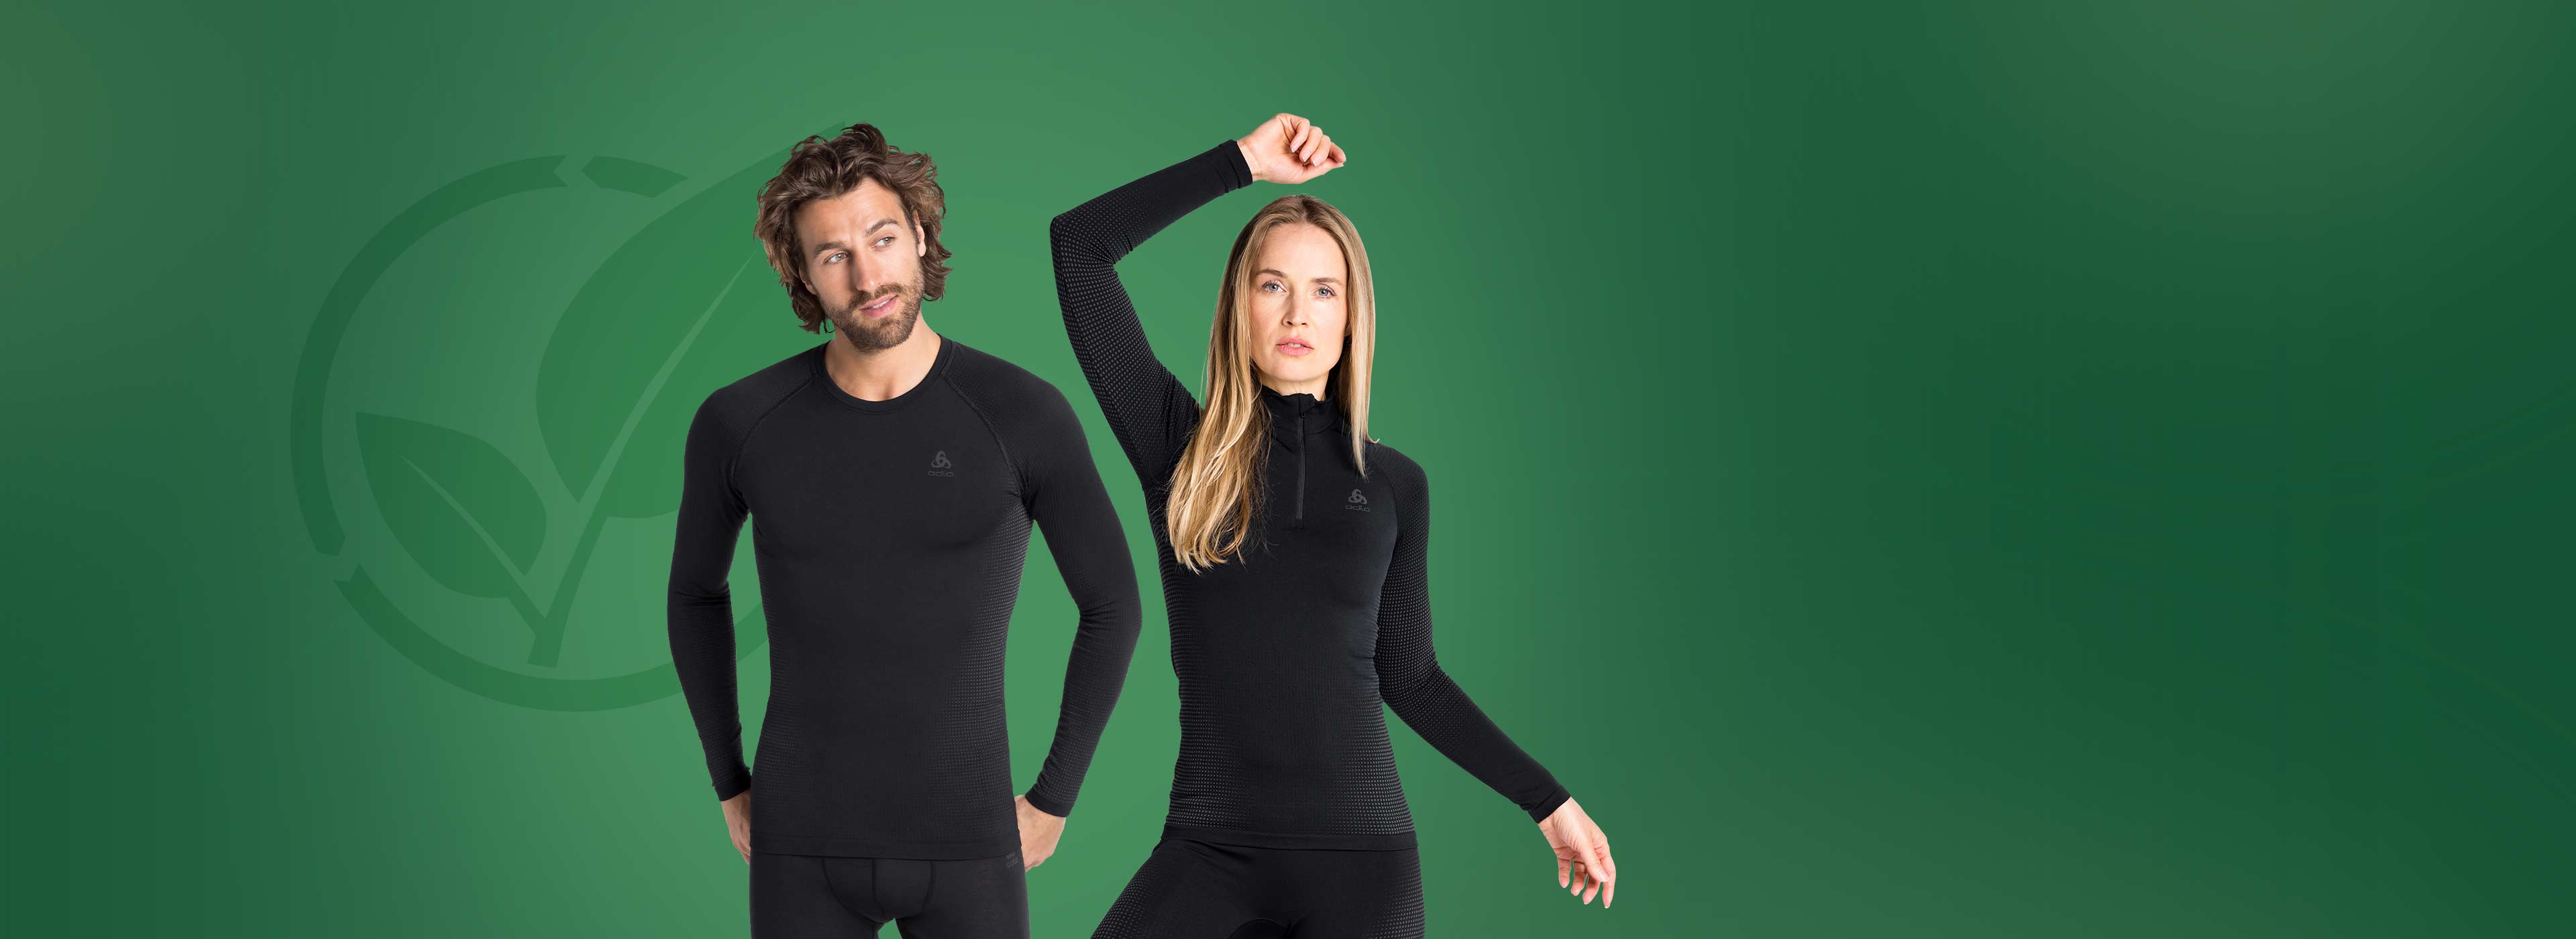 Eco base layers with eco label